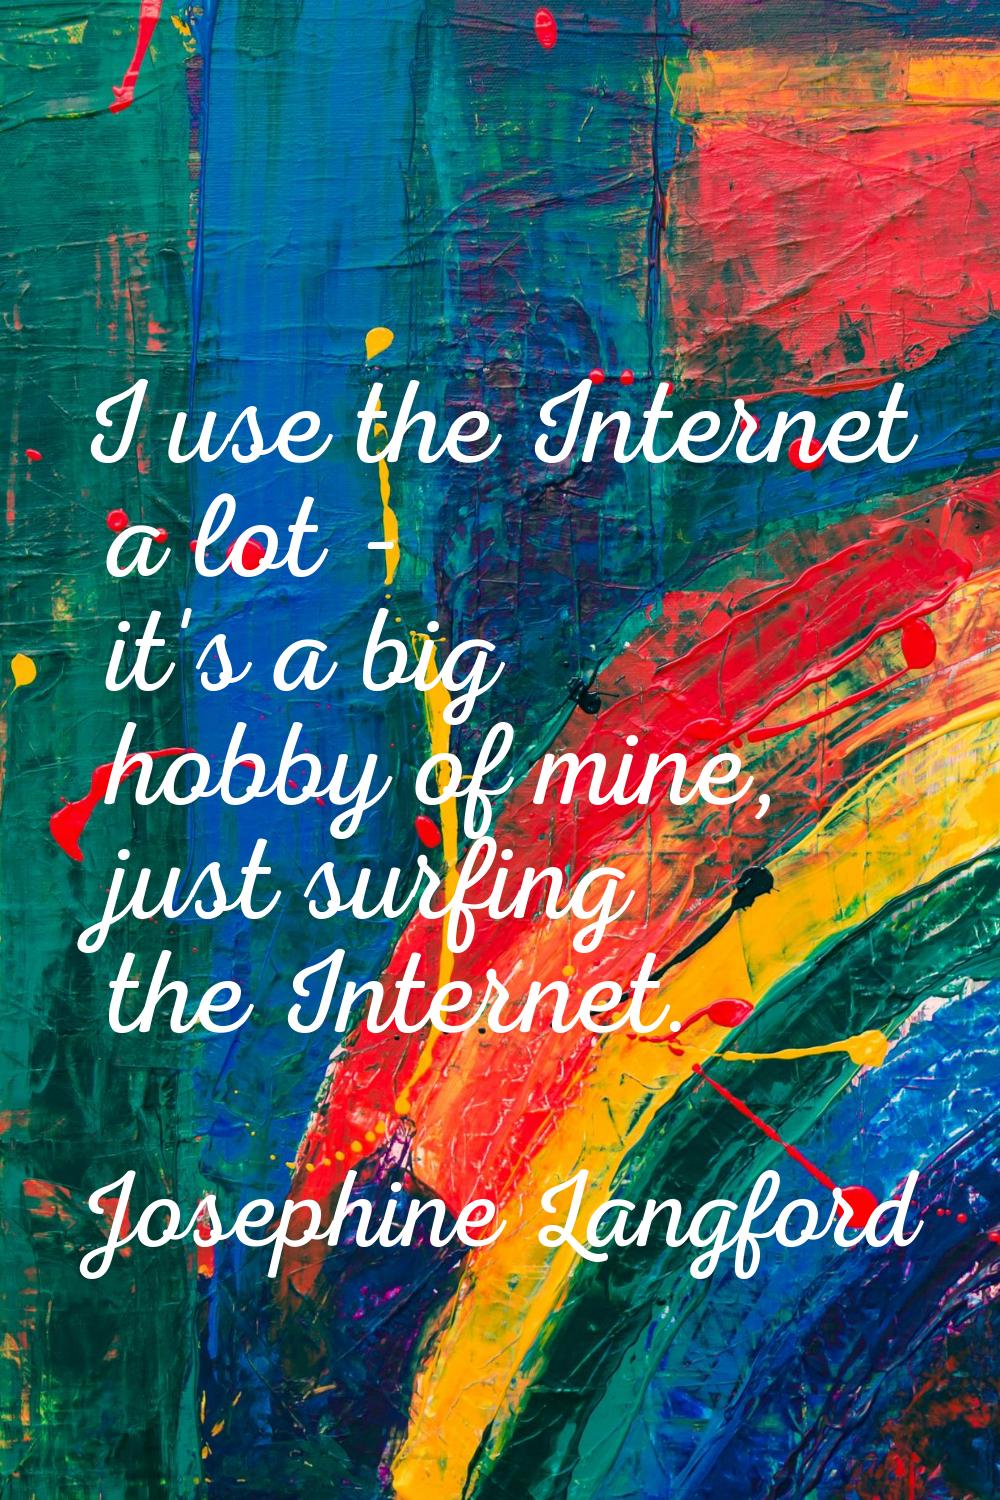 I use the Internet a lot - it's a big hobby of mine, just surfing the Internet.